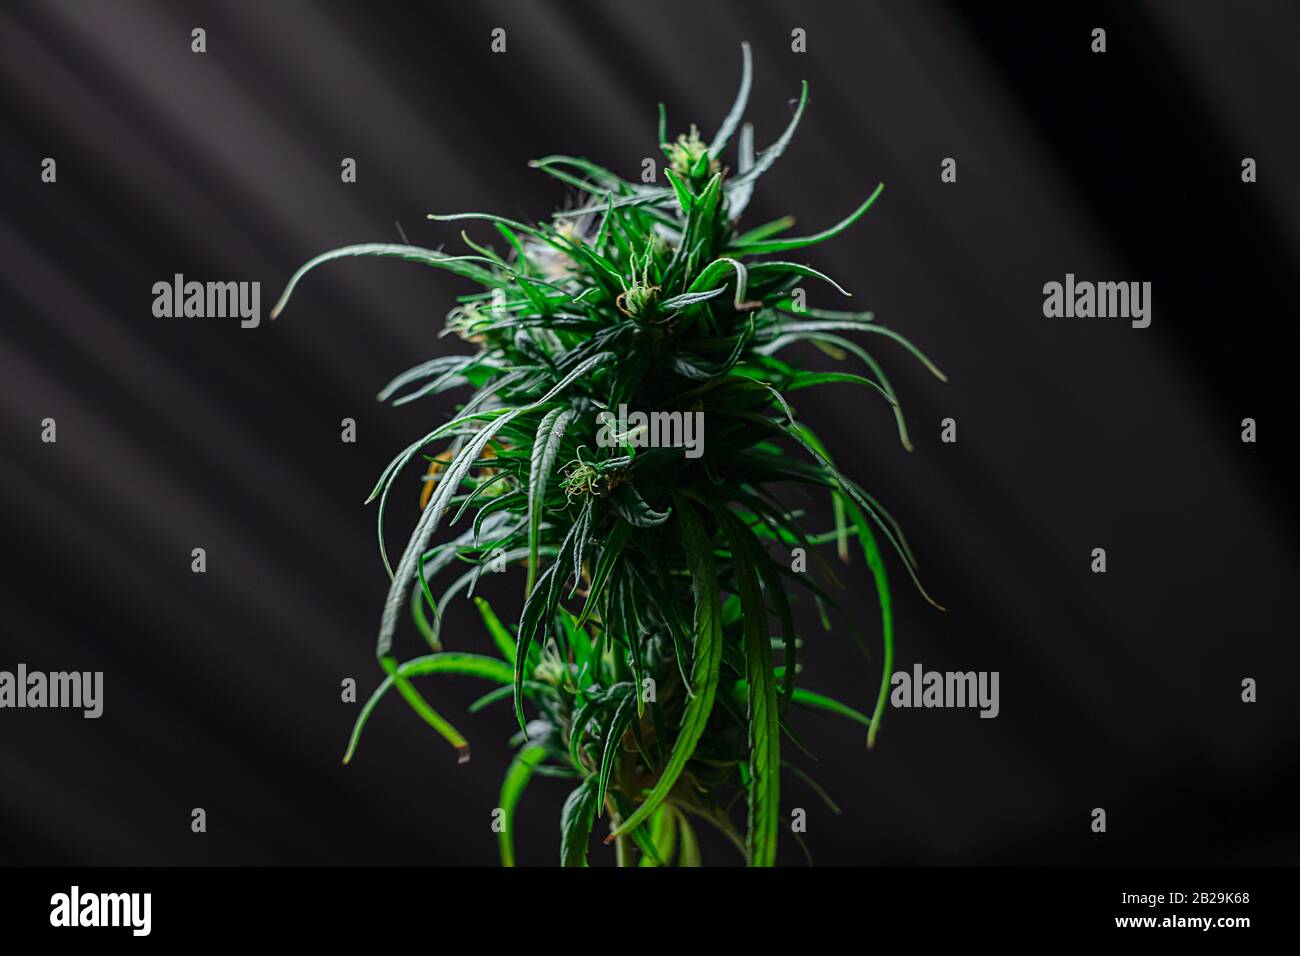 Close up fresh green medicinal plant cannabis blooming at black background close up, Marijuana plant with early flowers, sativa leaves Stock Photo